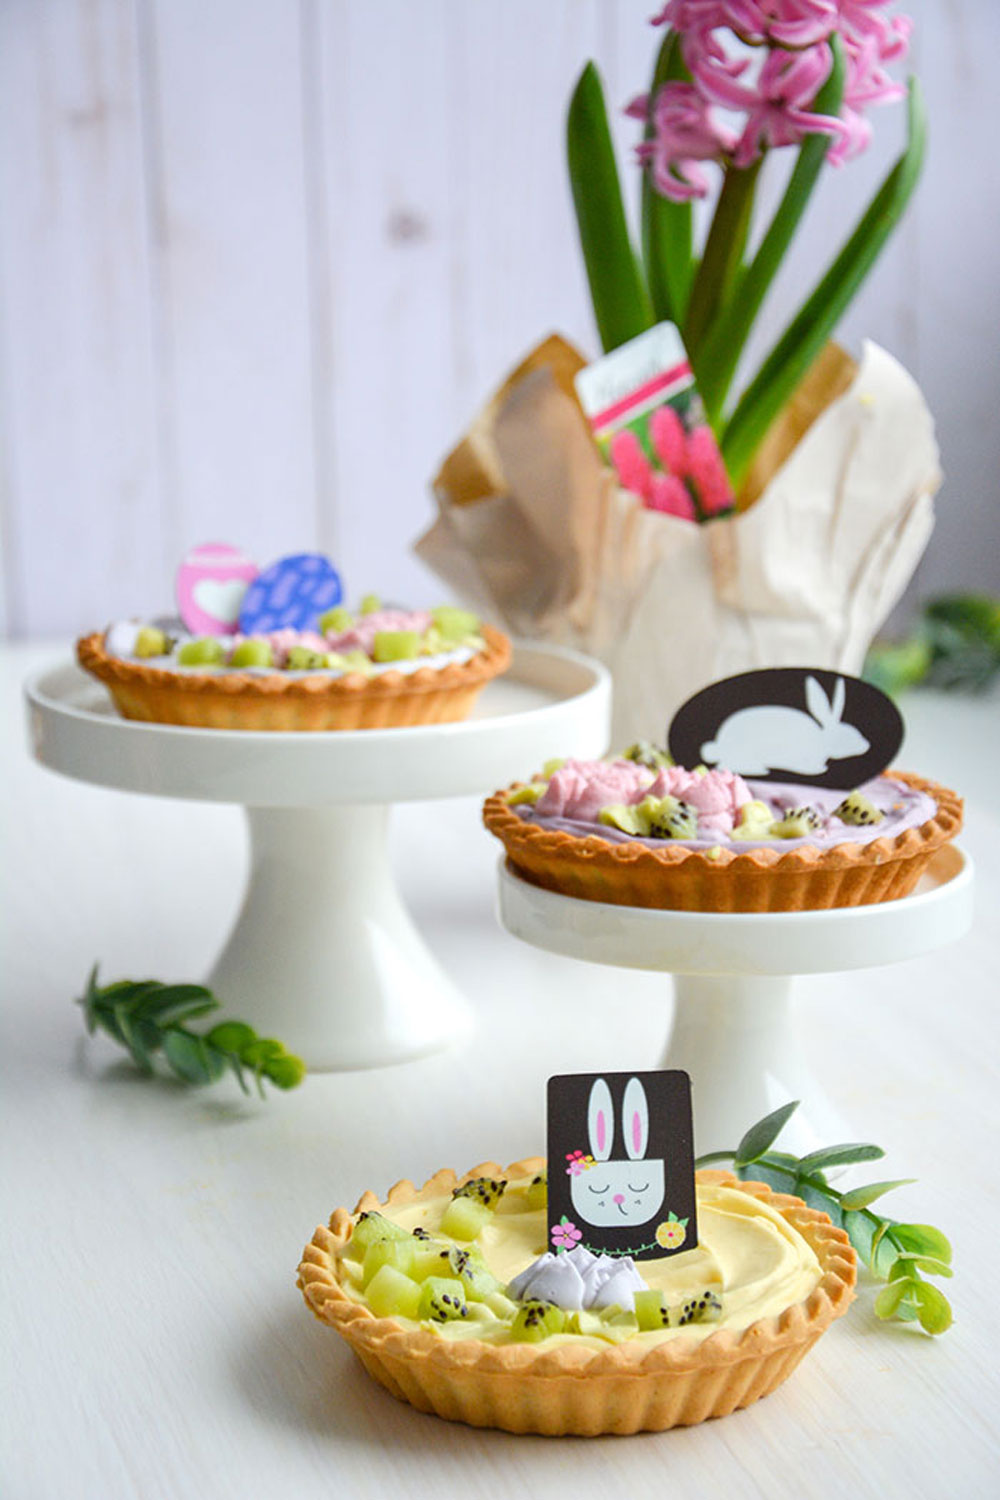 Butter tarts filled with multicolored pastry cream and chocolate easter bunny decorations on top